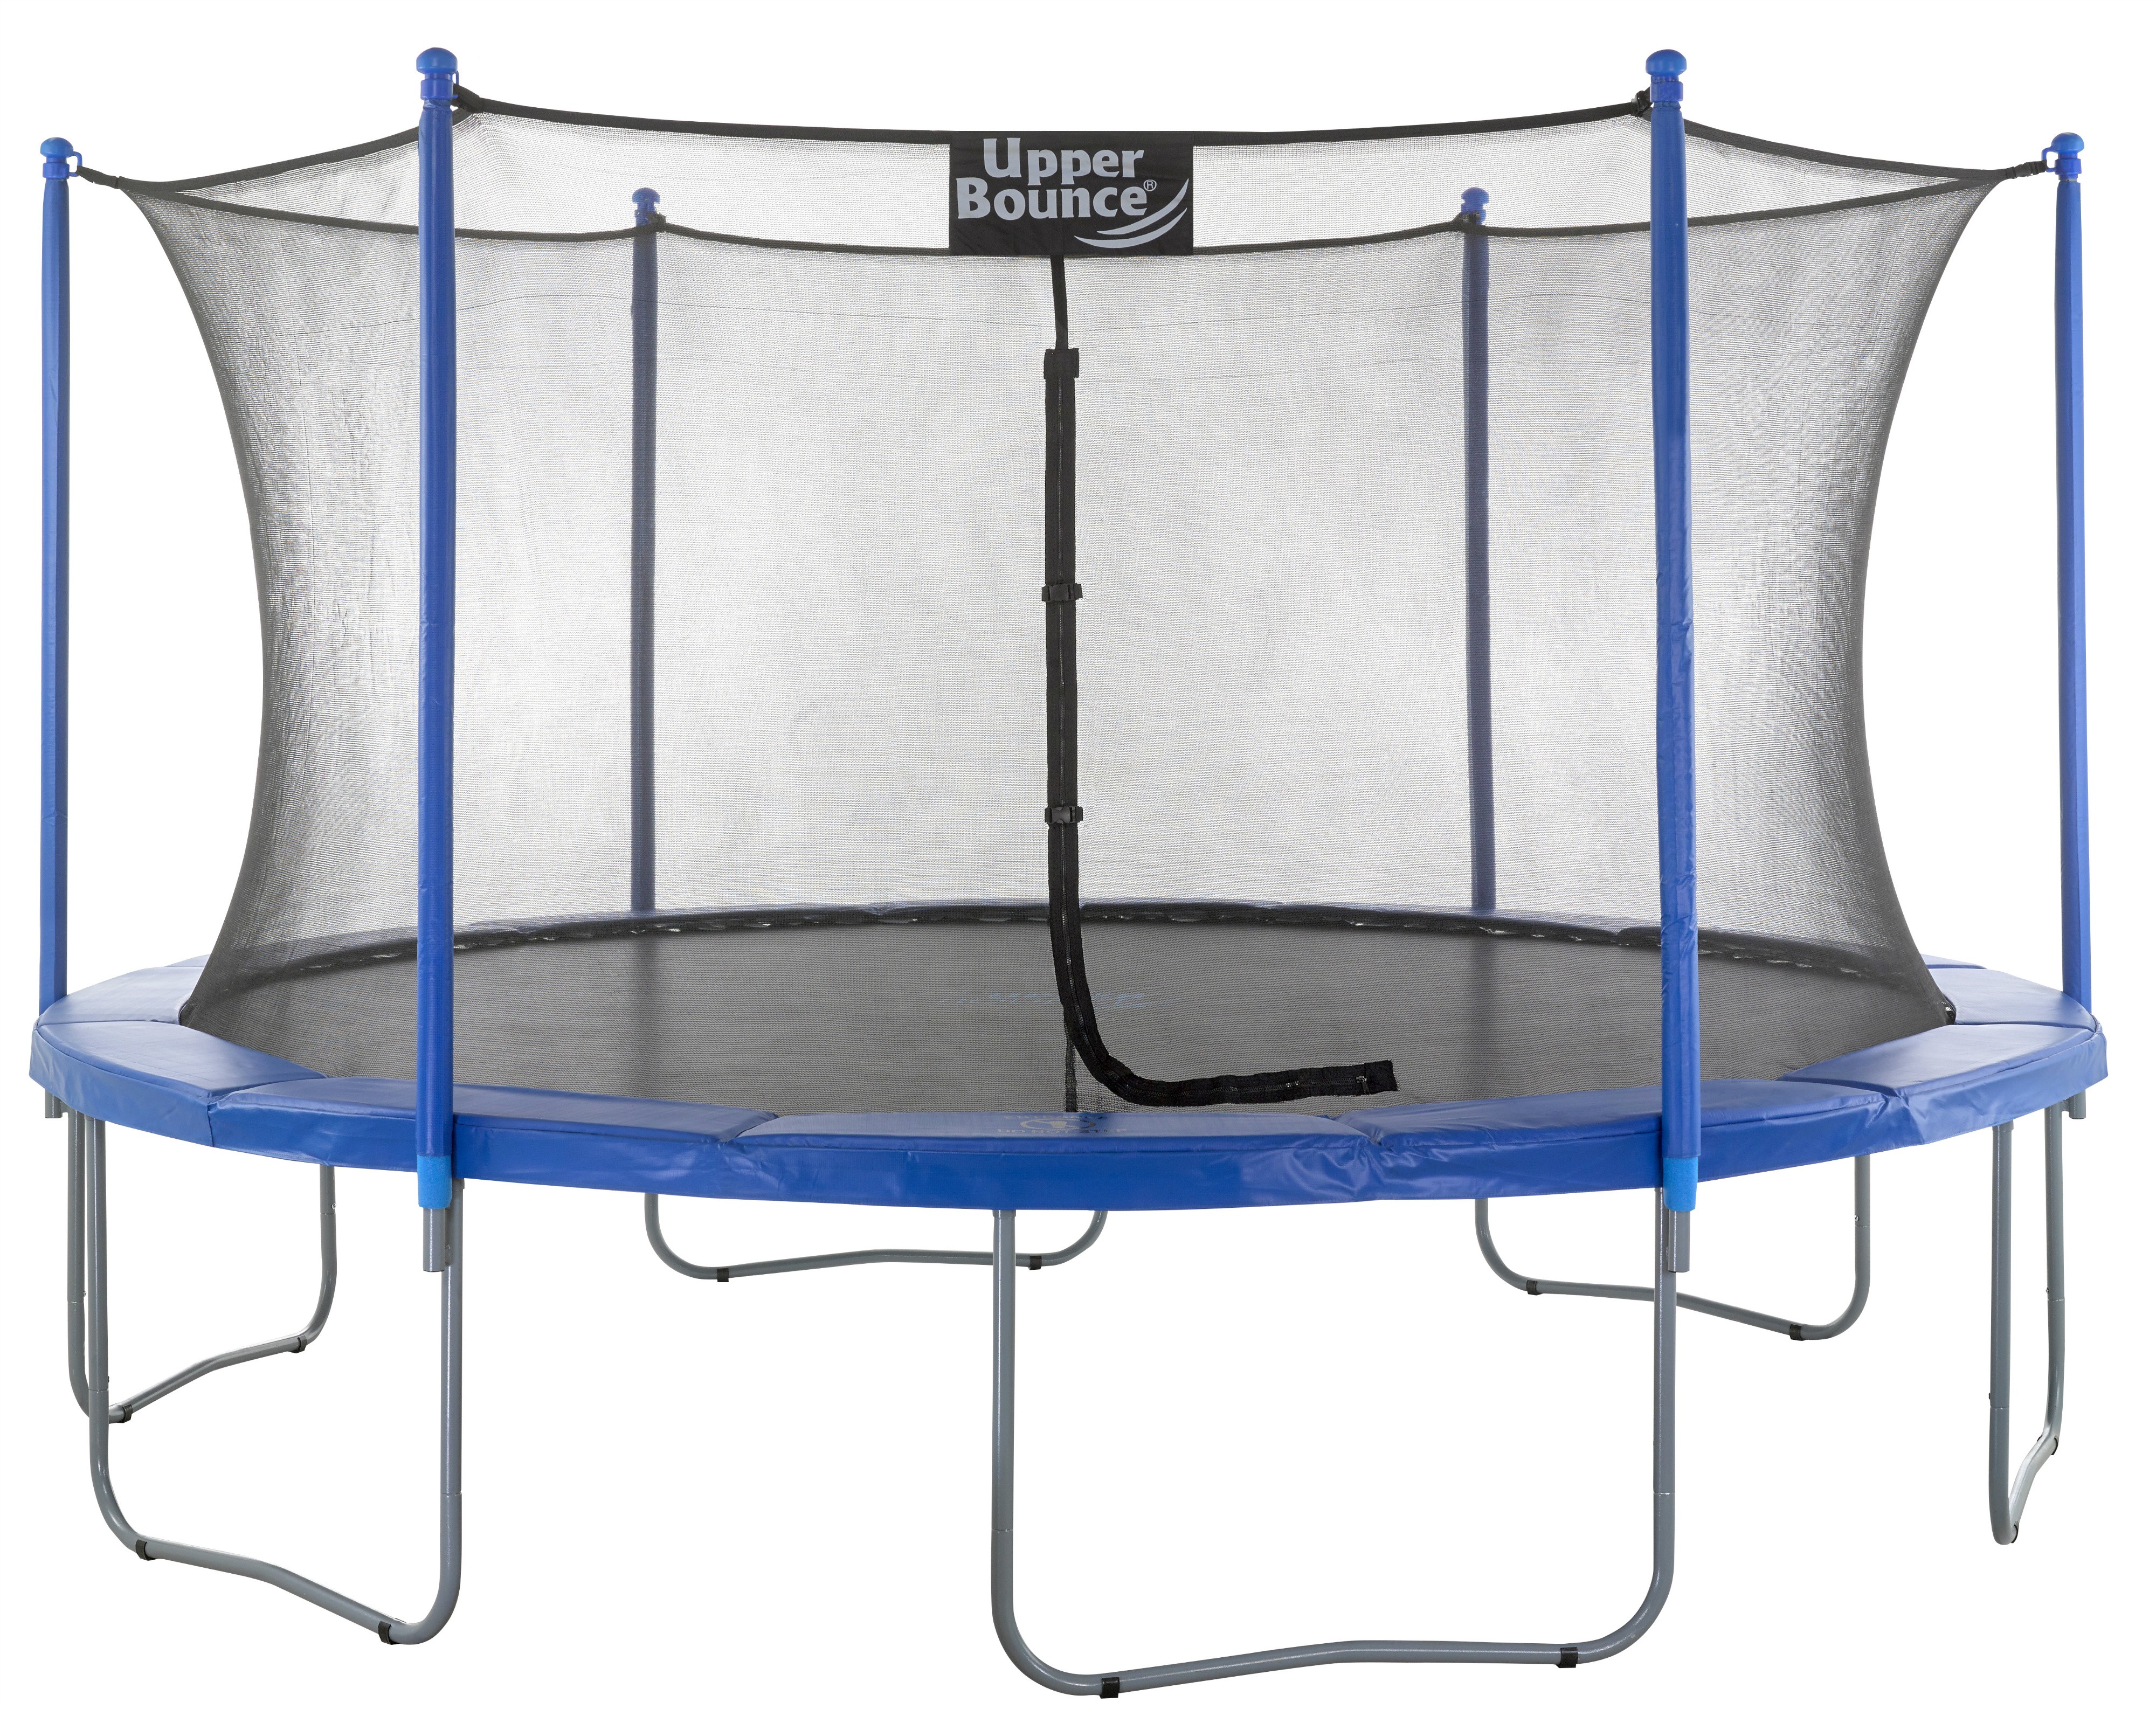 16Ft 488cm Large Trampoline and Enclosure Set | Garden & Outdoor Trampoline with Safety Net, Mat, Pad | Blue